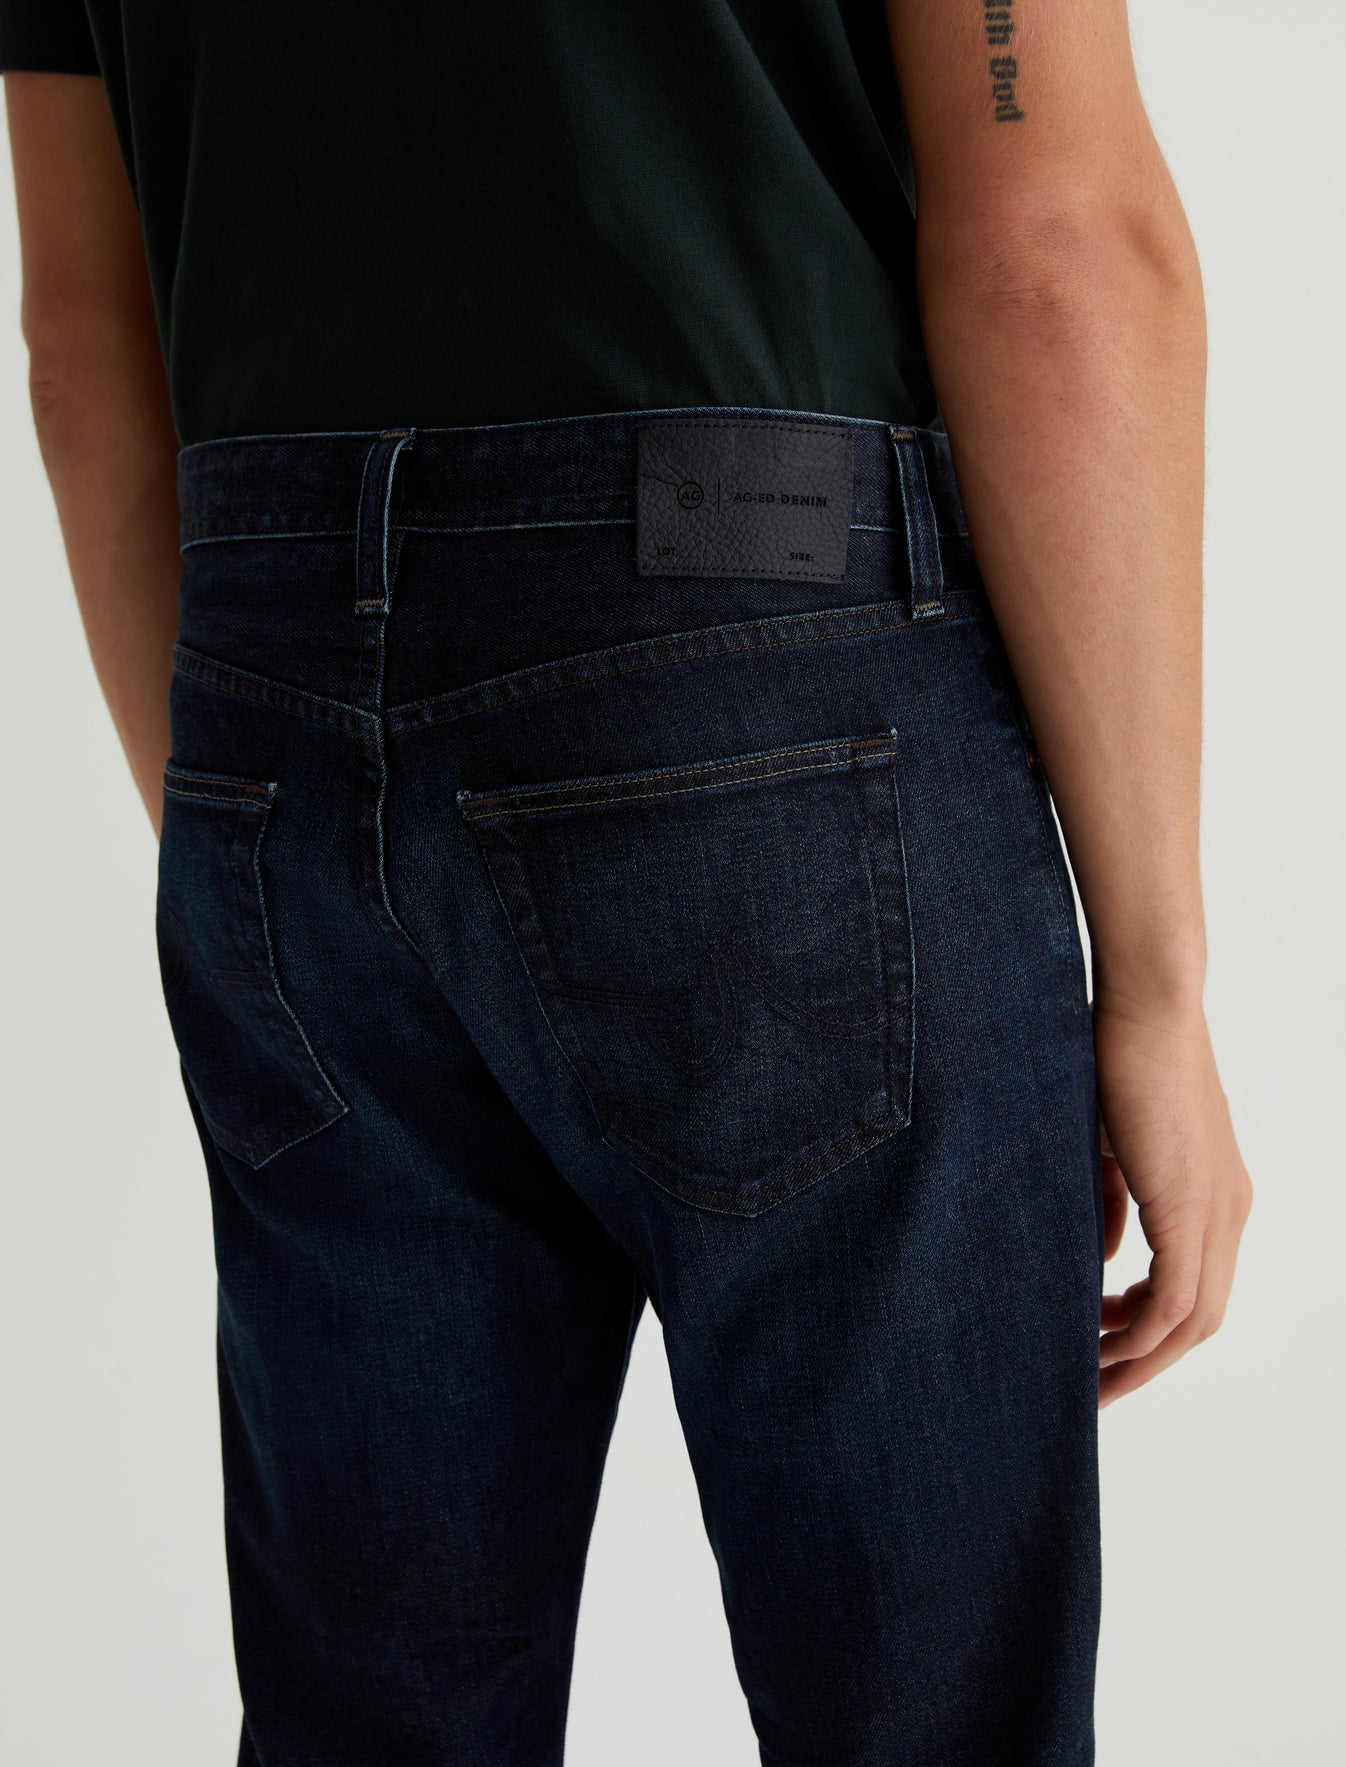 Official 3 Store Everett Holzer Years Mens Jeans AG at